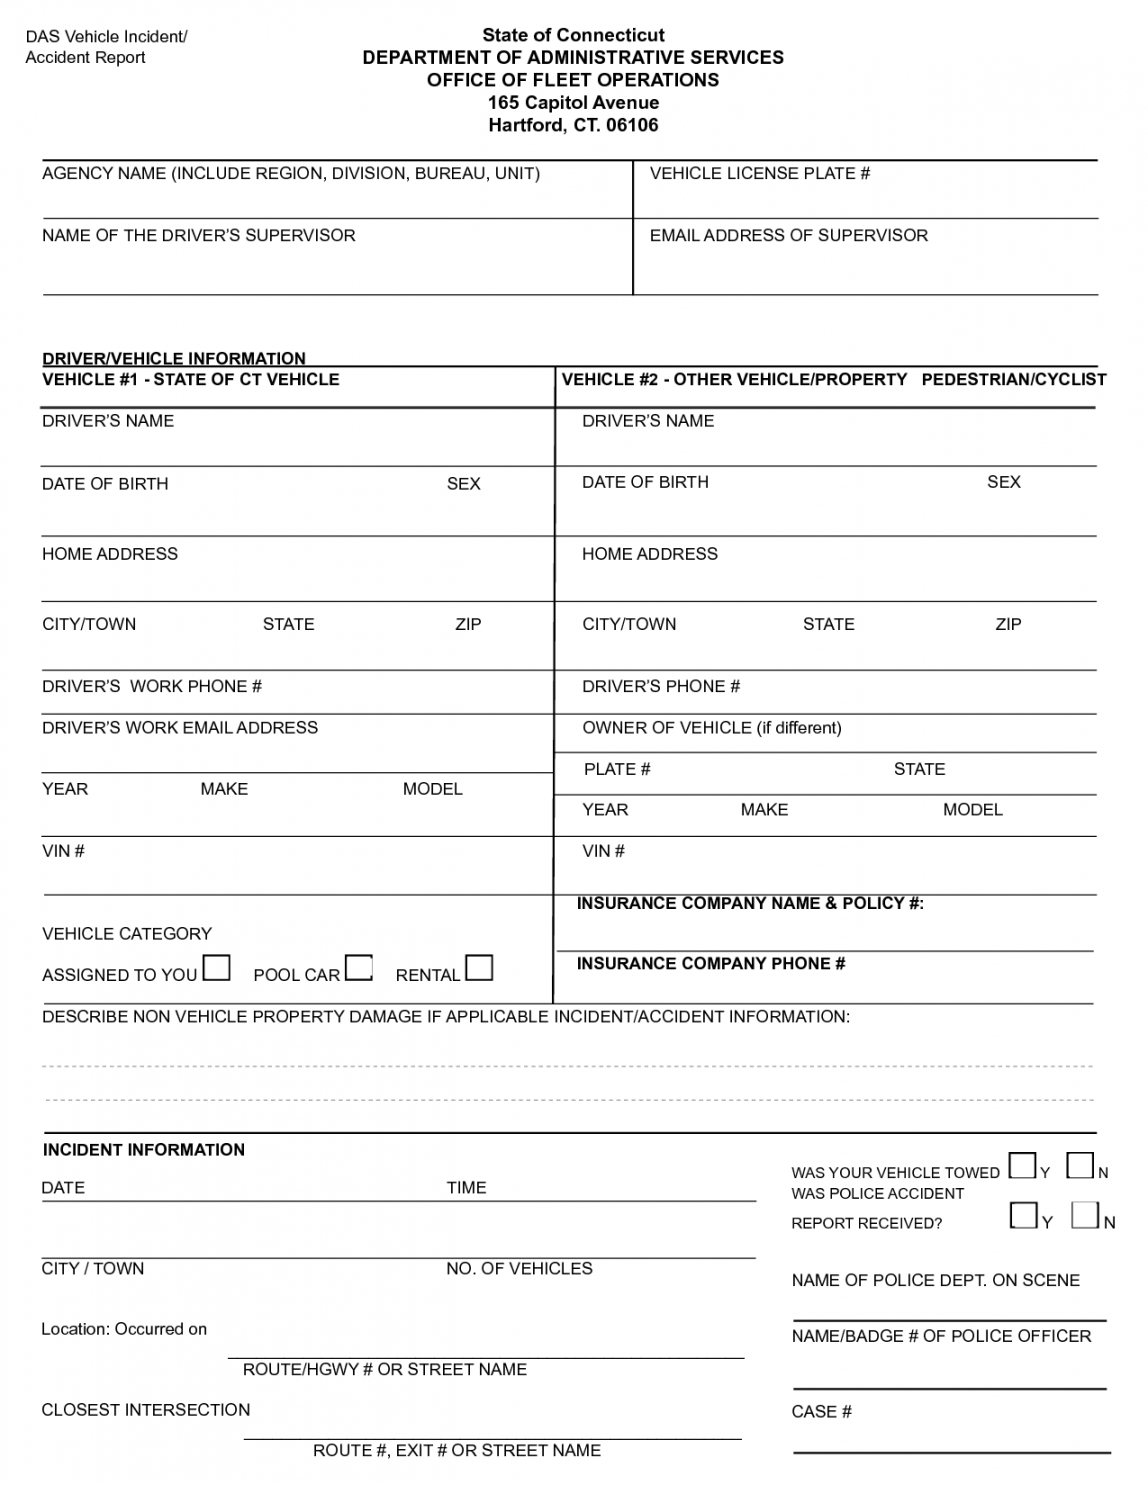 Vehicle Incident Report Template Throughout Motor Vehicle Accident Report Form Template